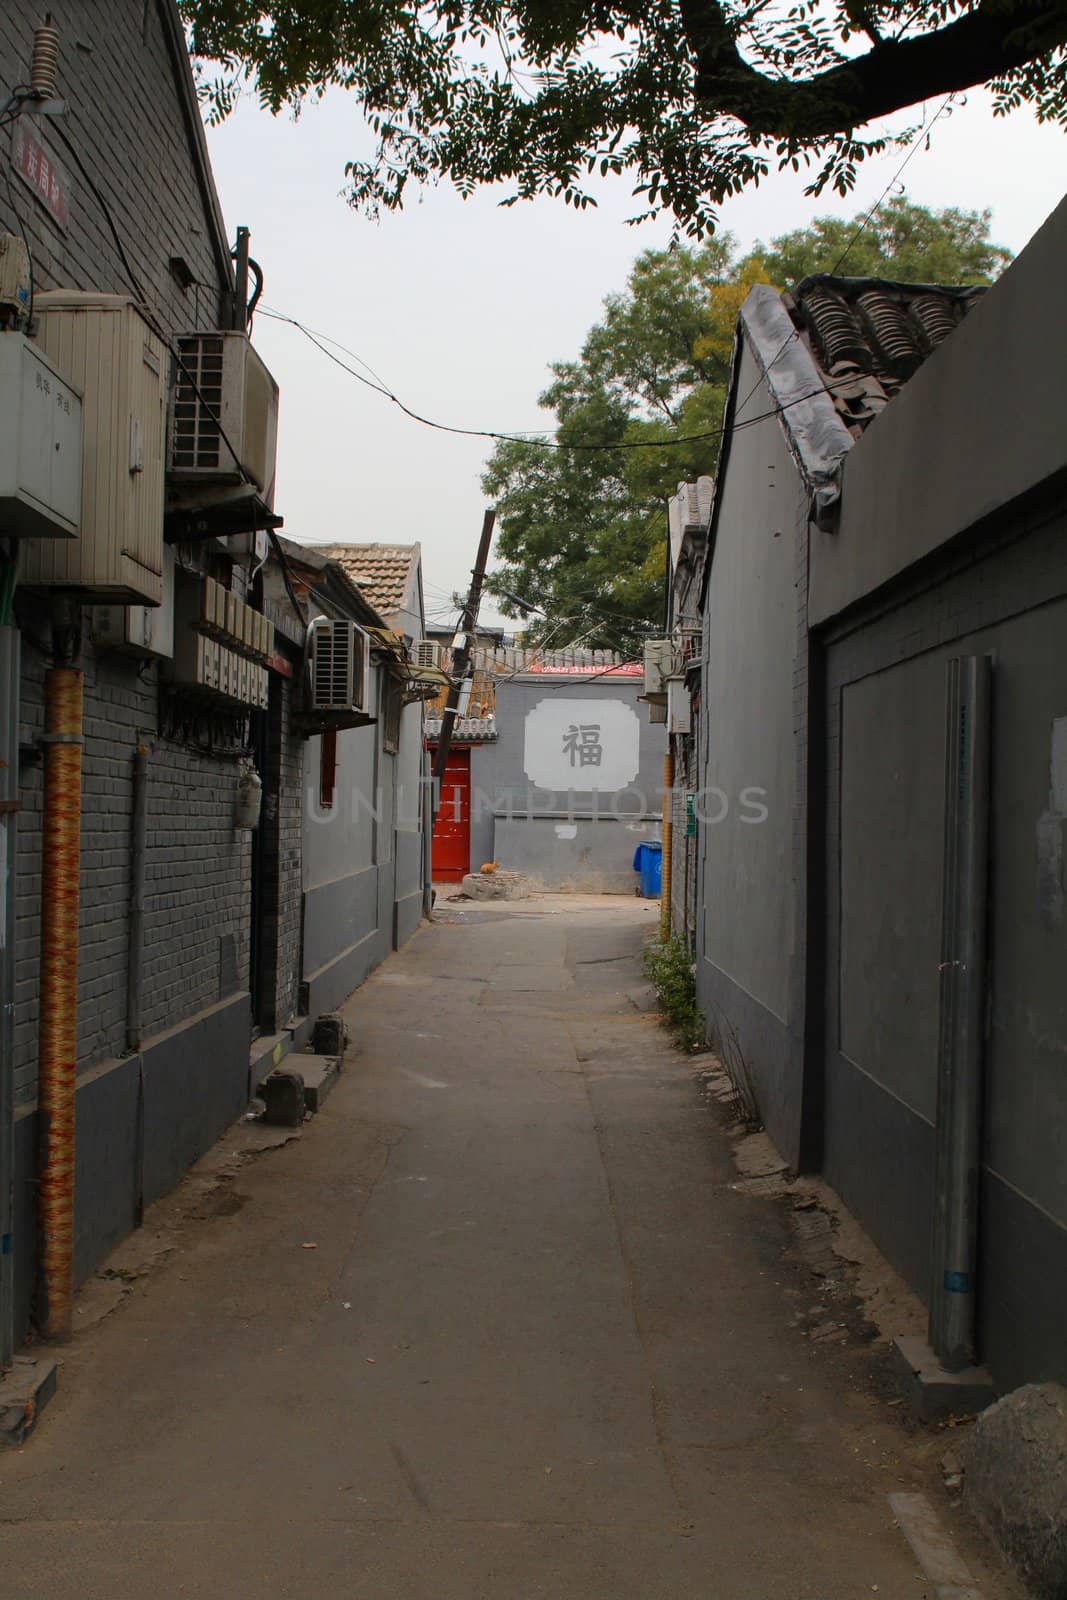 Hutong, a typical narrow street in Beijing, China
